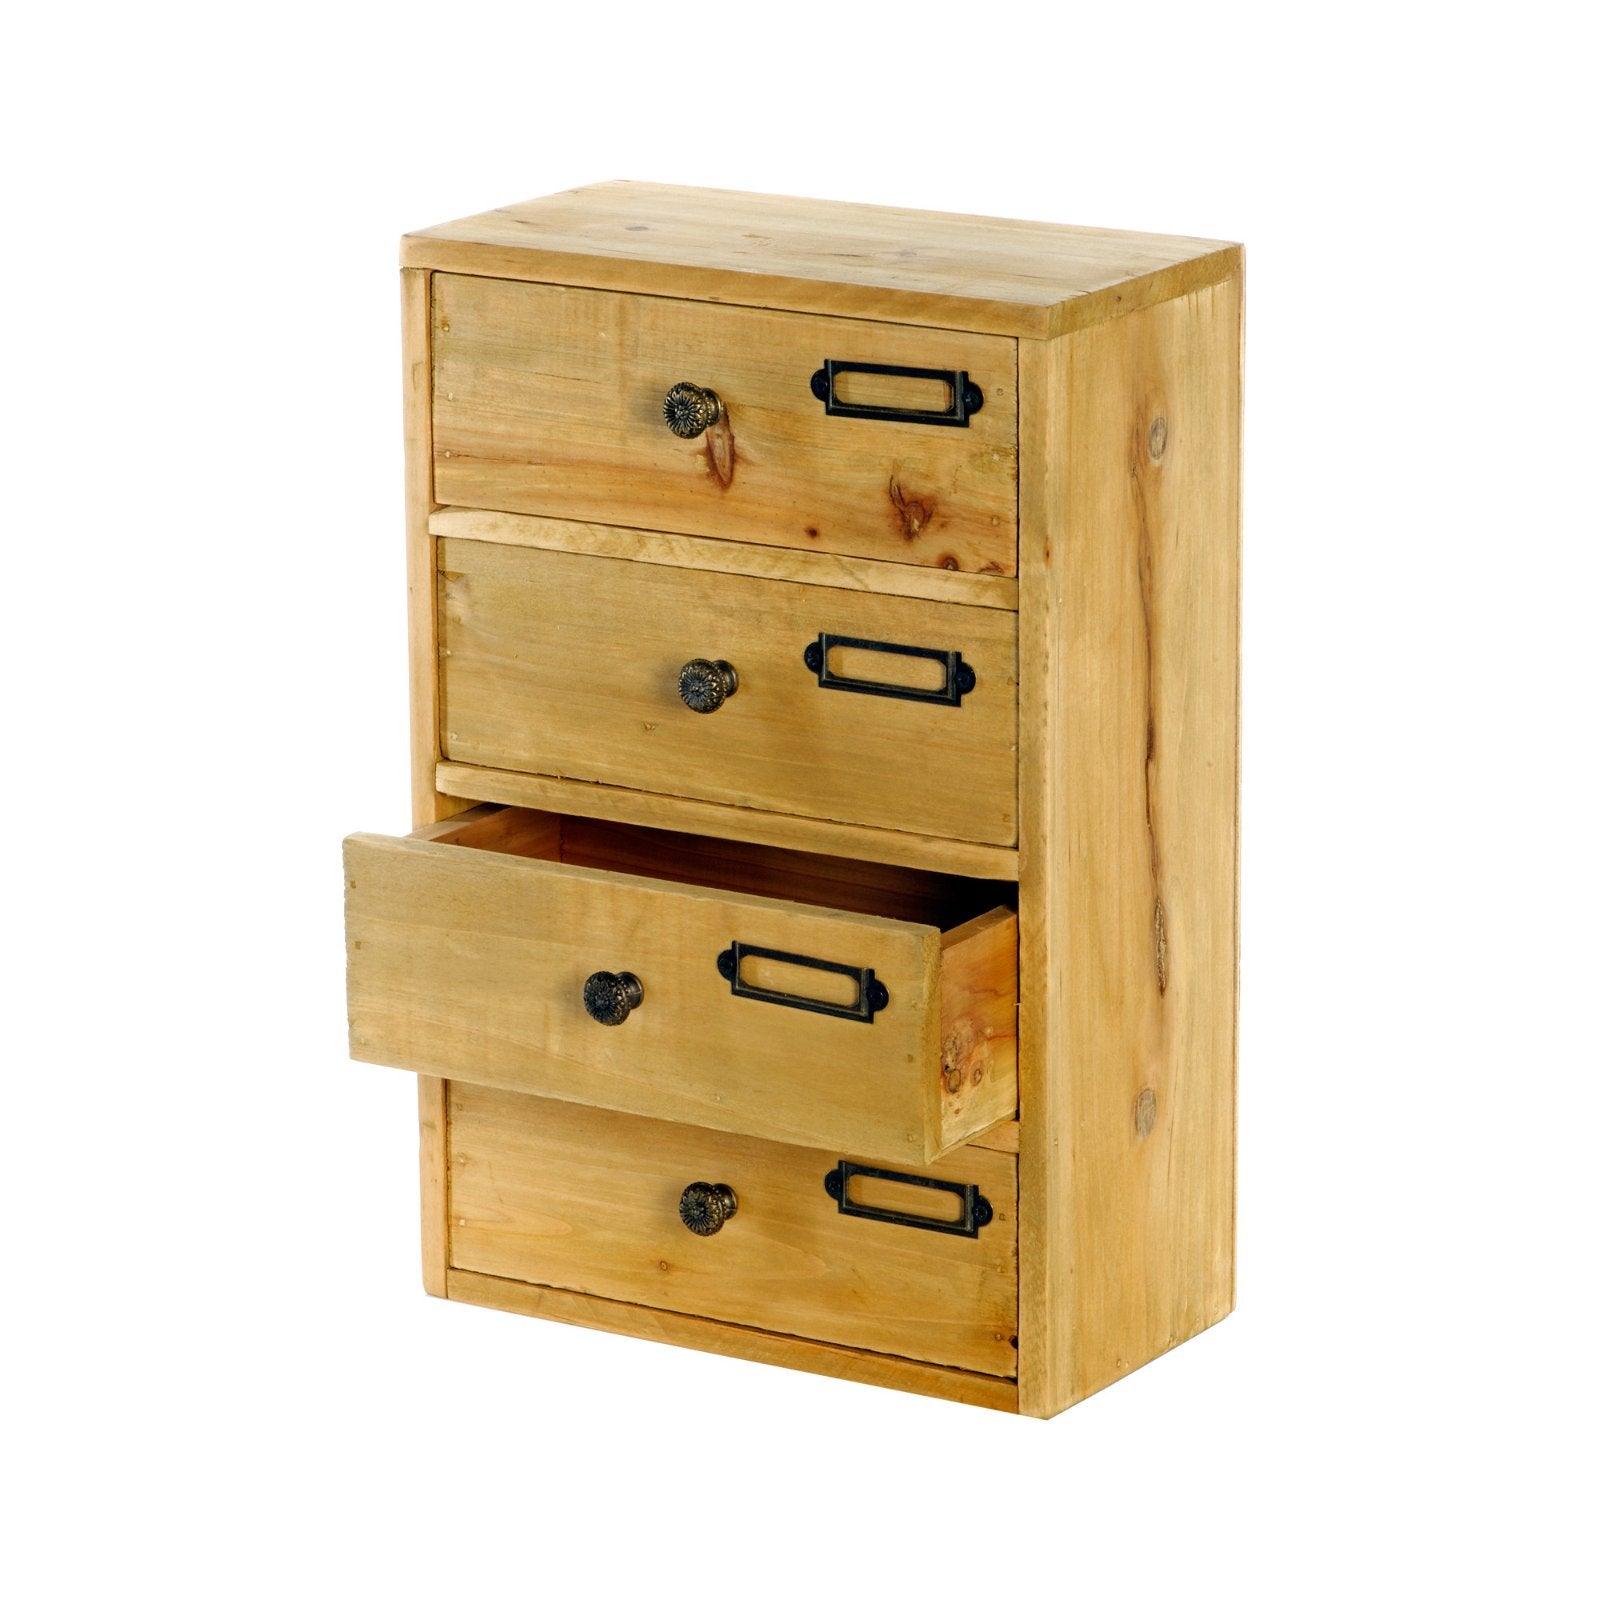 View Tall 4 Drawers Wooden Storage 23 x 13 x 34 cm information